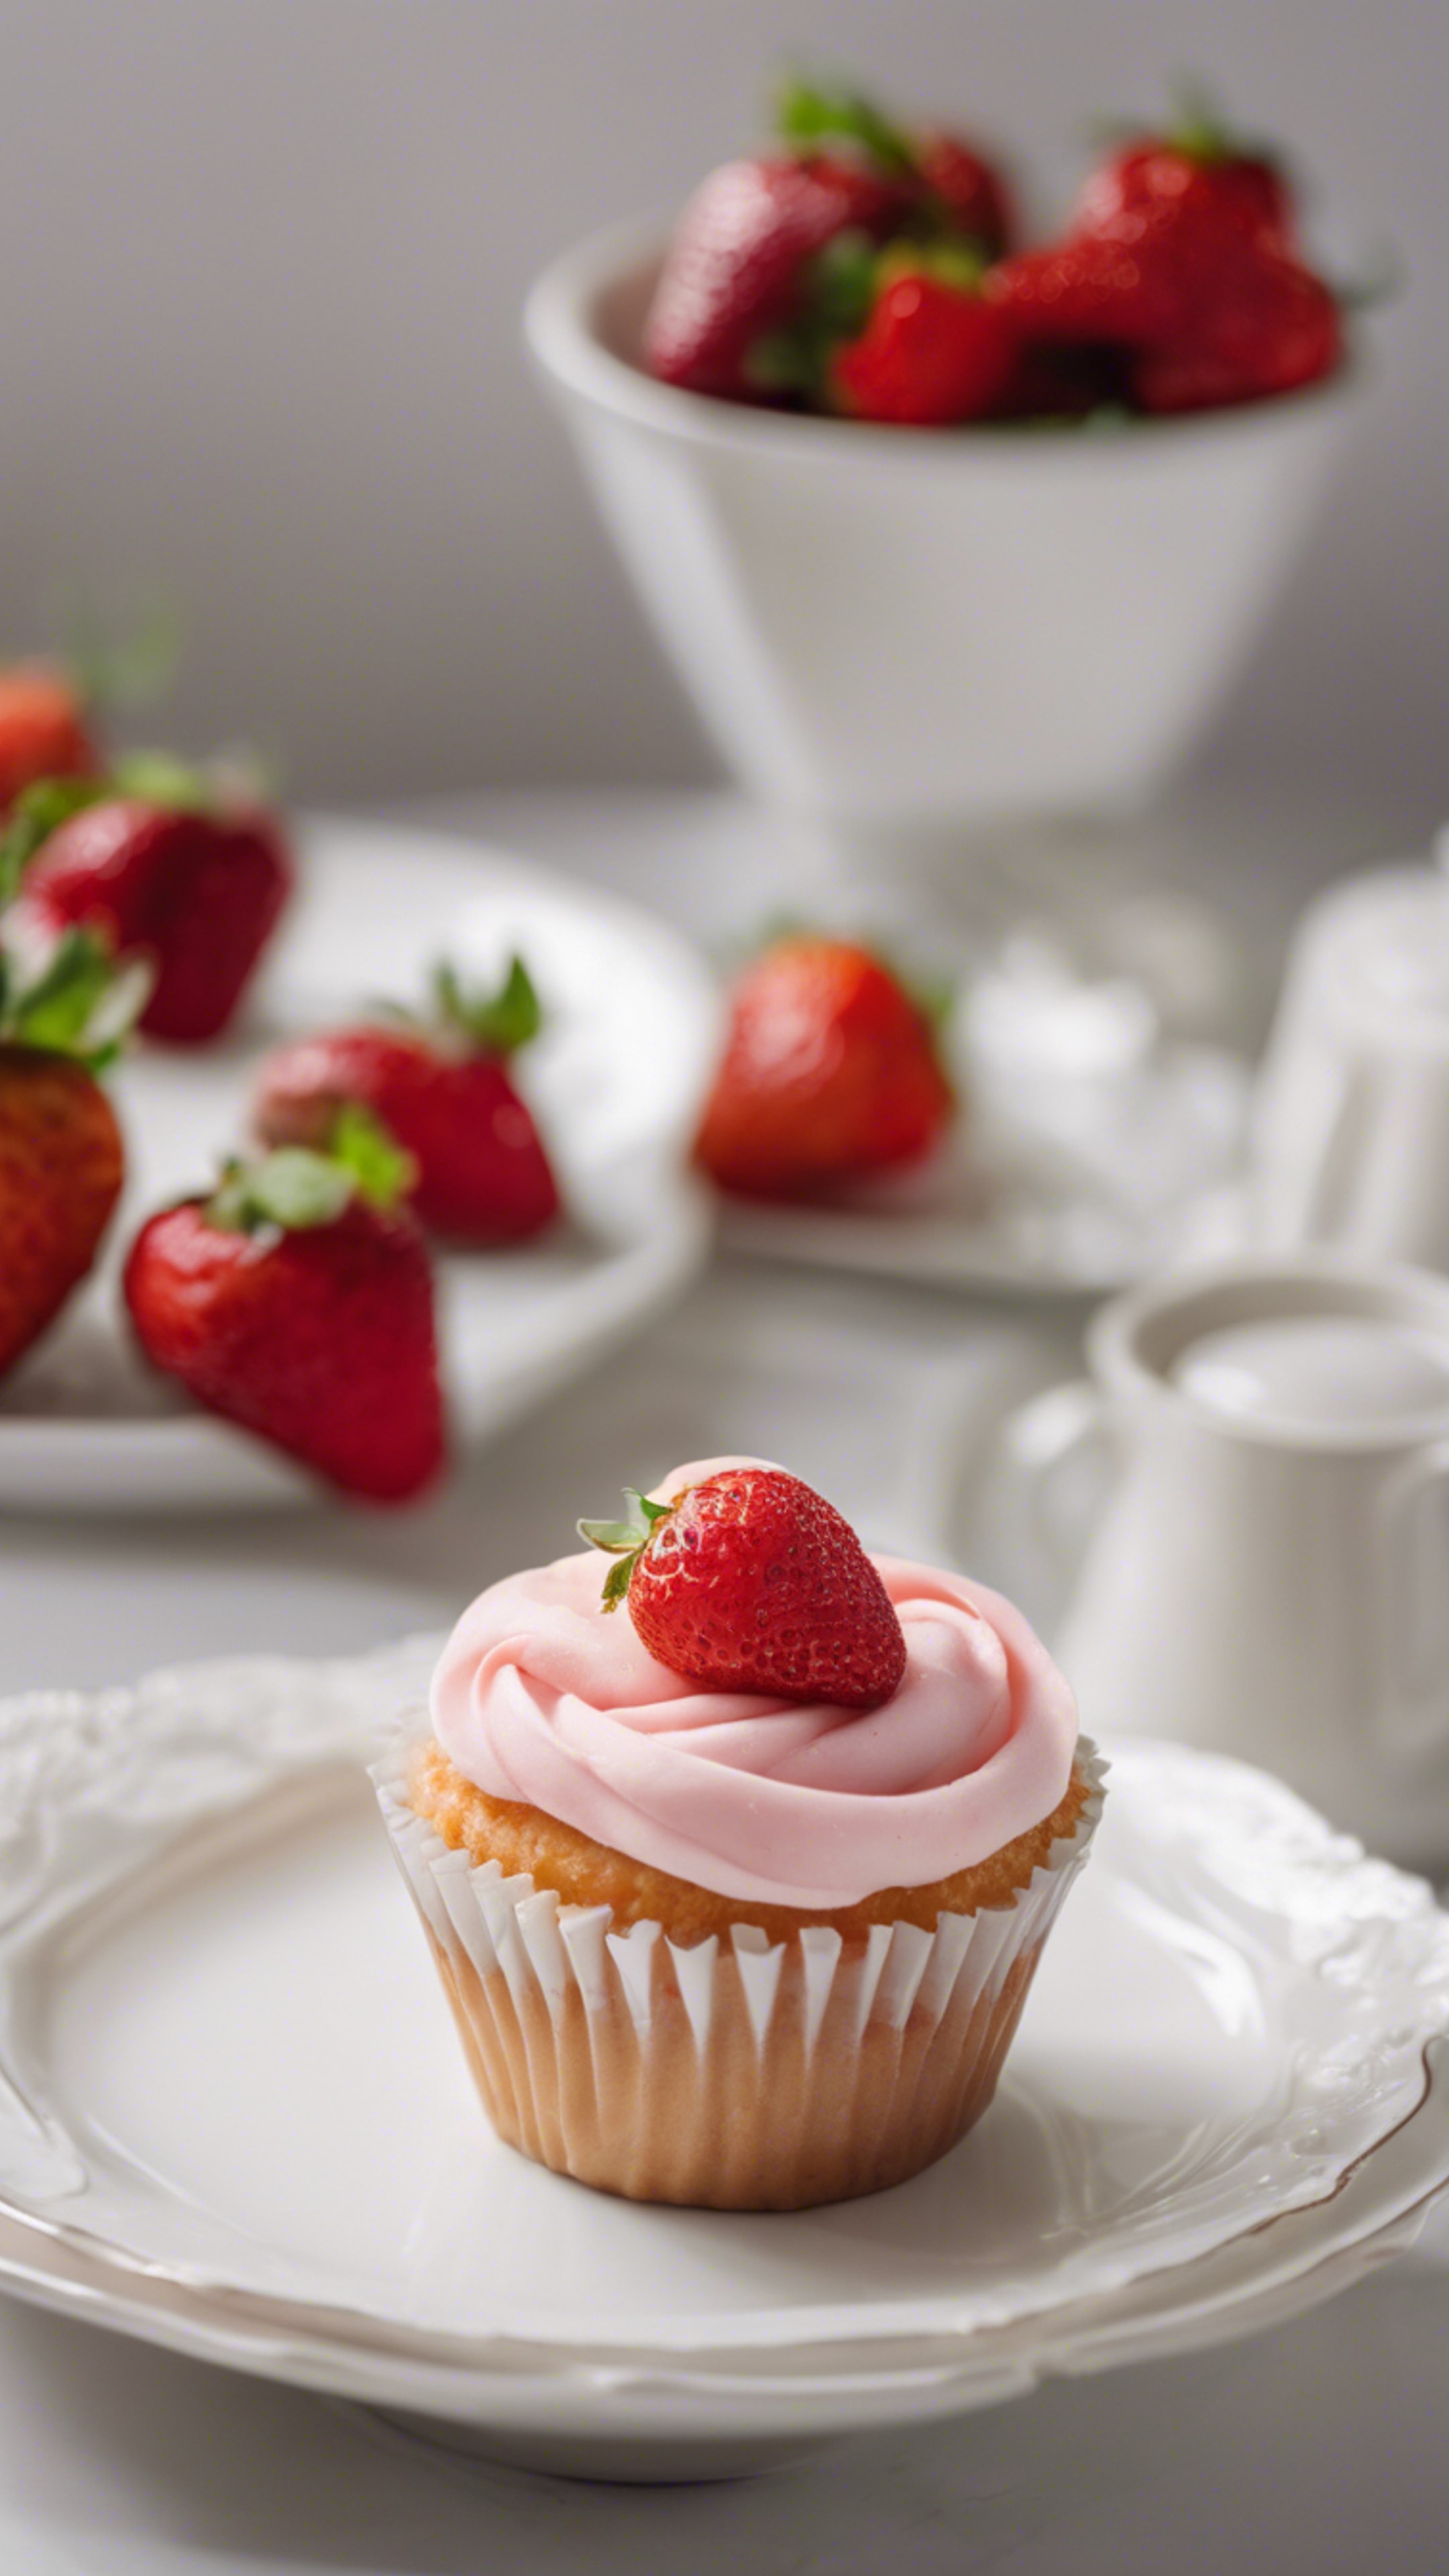 A single strawberry cupcake on a white porcelain plate in bright daylight.壁紙[ddcb3576222e4604b5c8]